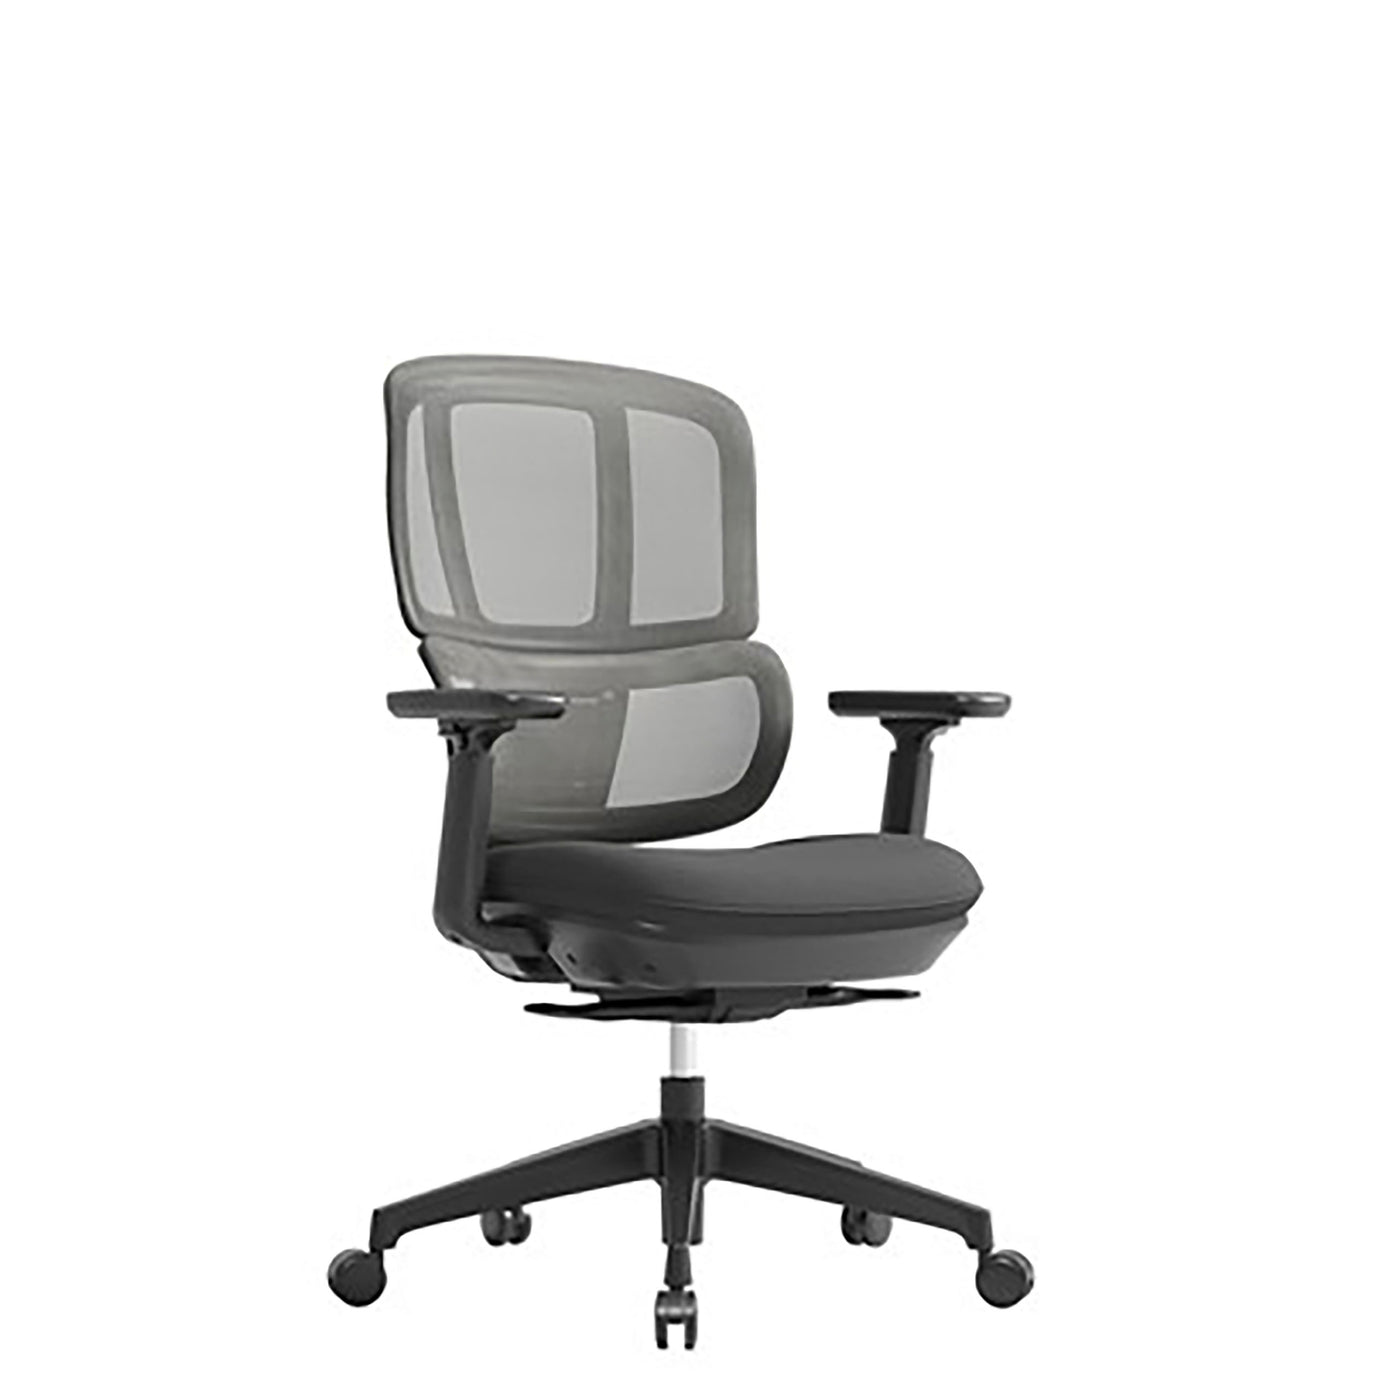 Shelby ergonomic home office chair by Home by Innov8